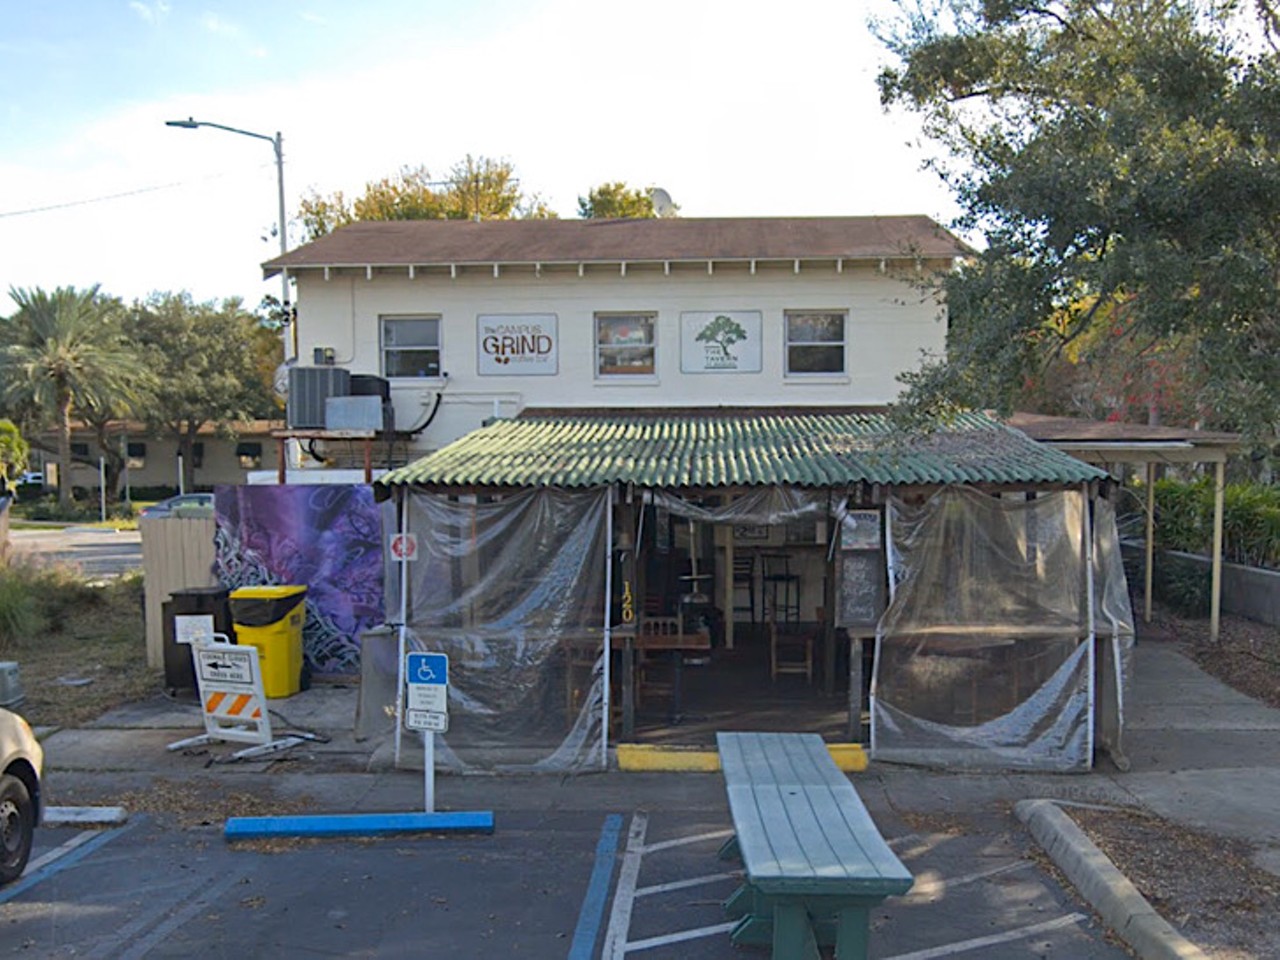 The Tavern at Bayboro
120 6th Ave S, St. Petersburg, FL
Located right next to USF St. Pete, this small bar is easy to miss and often has live music and open mics 7-10 p.m. on Wednesdays. They also have specials on beer and seltzers on Saturdays for college football season. 
Photo via Google Maps